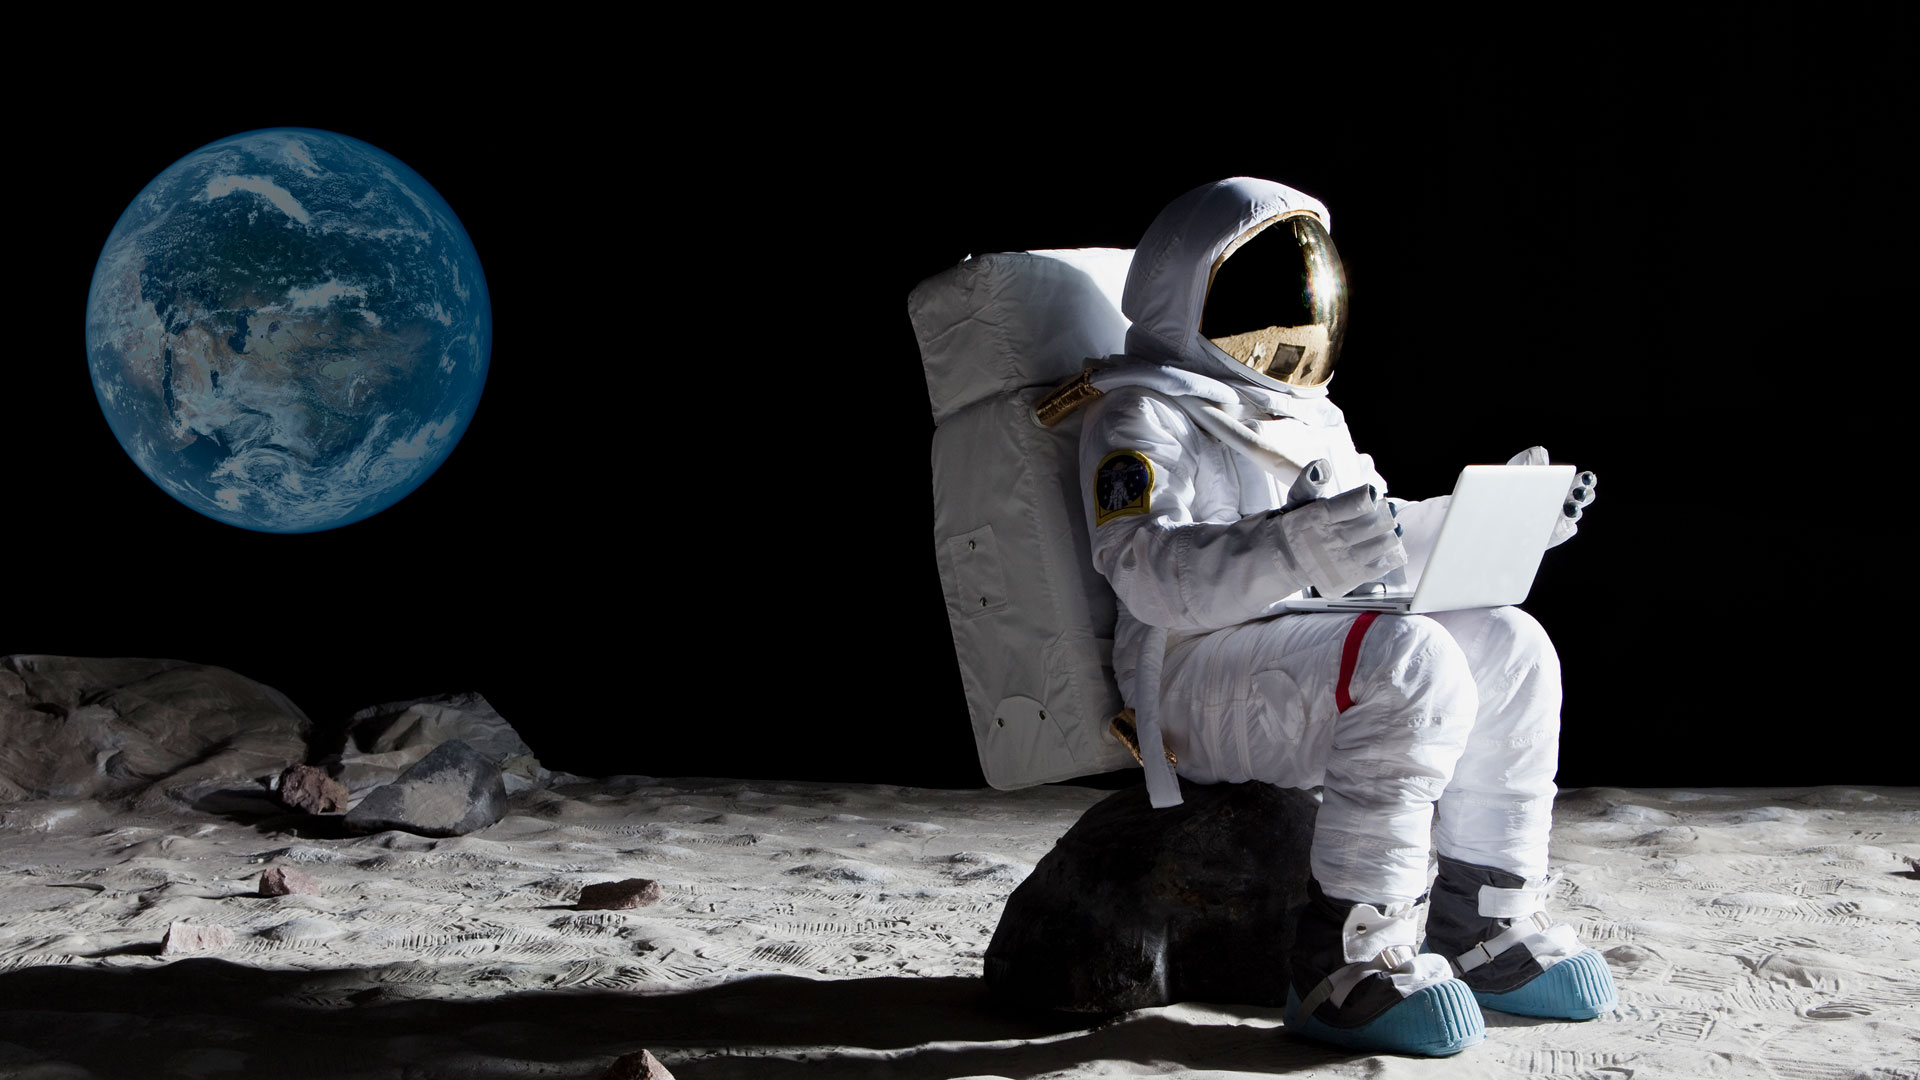 Astronaut working on the moon with laptop.